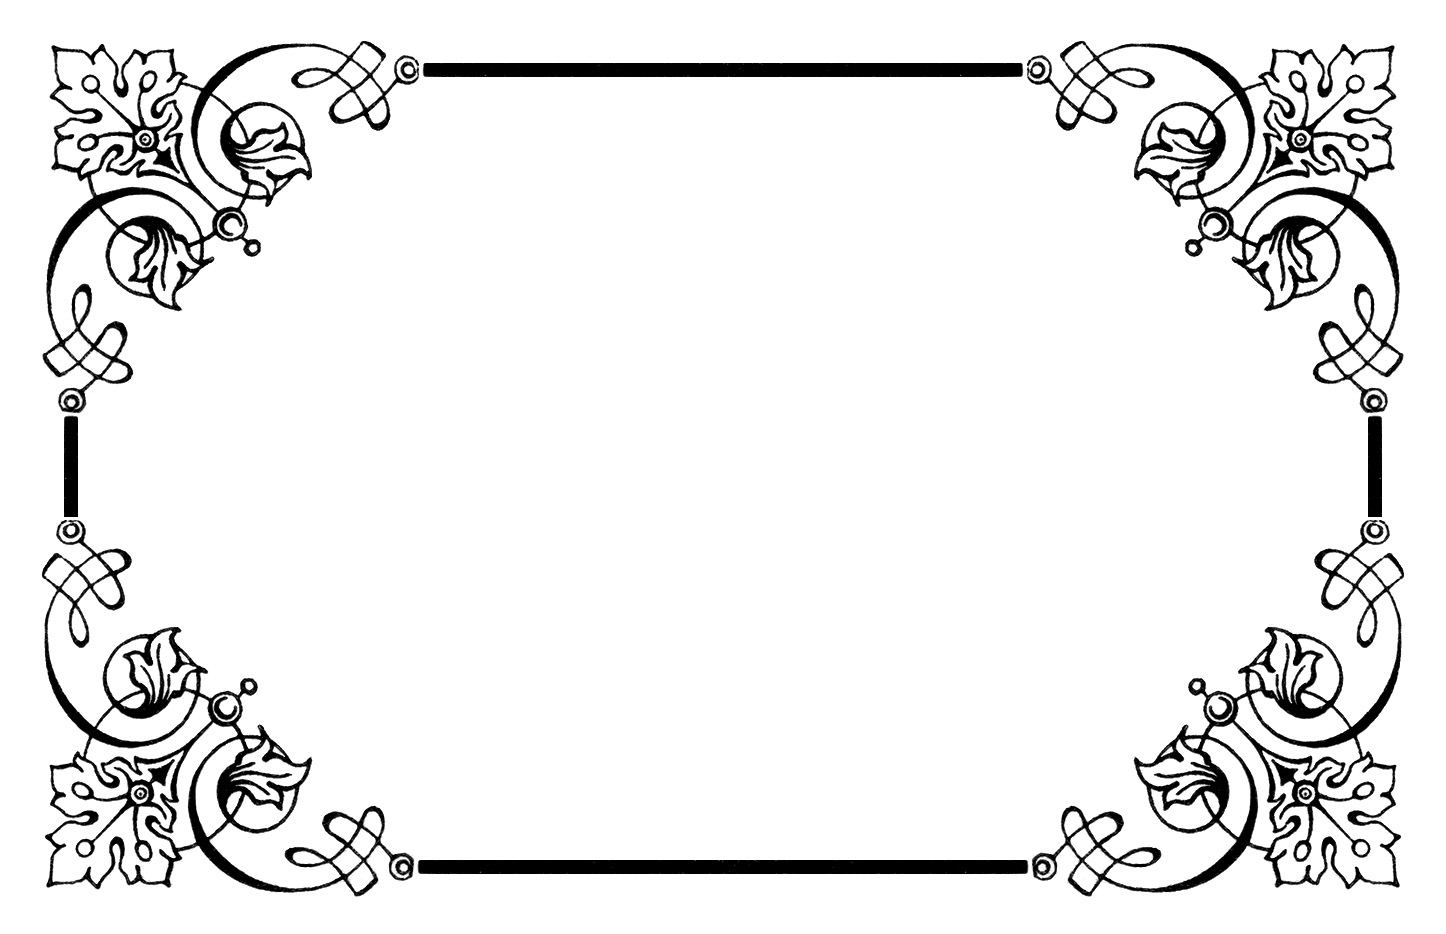 clip art borders and frames free download - photo #35